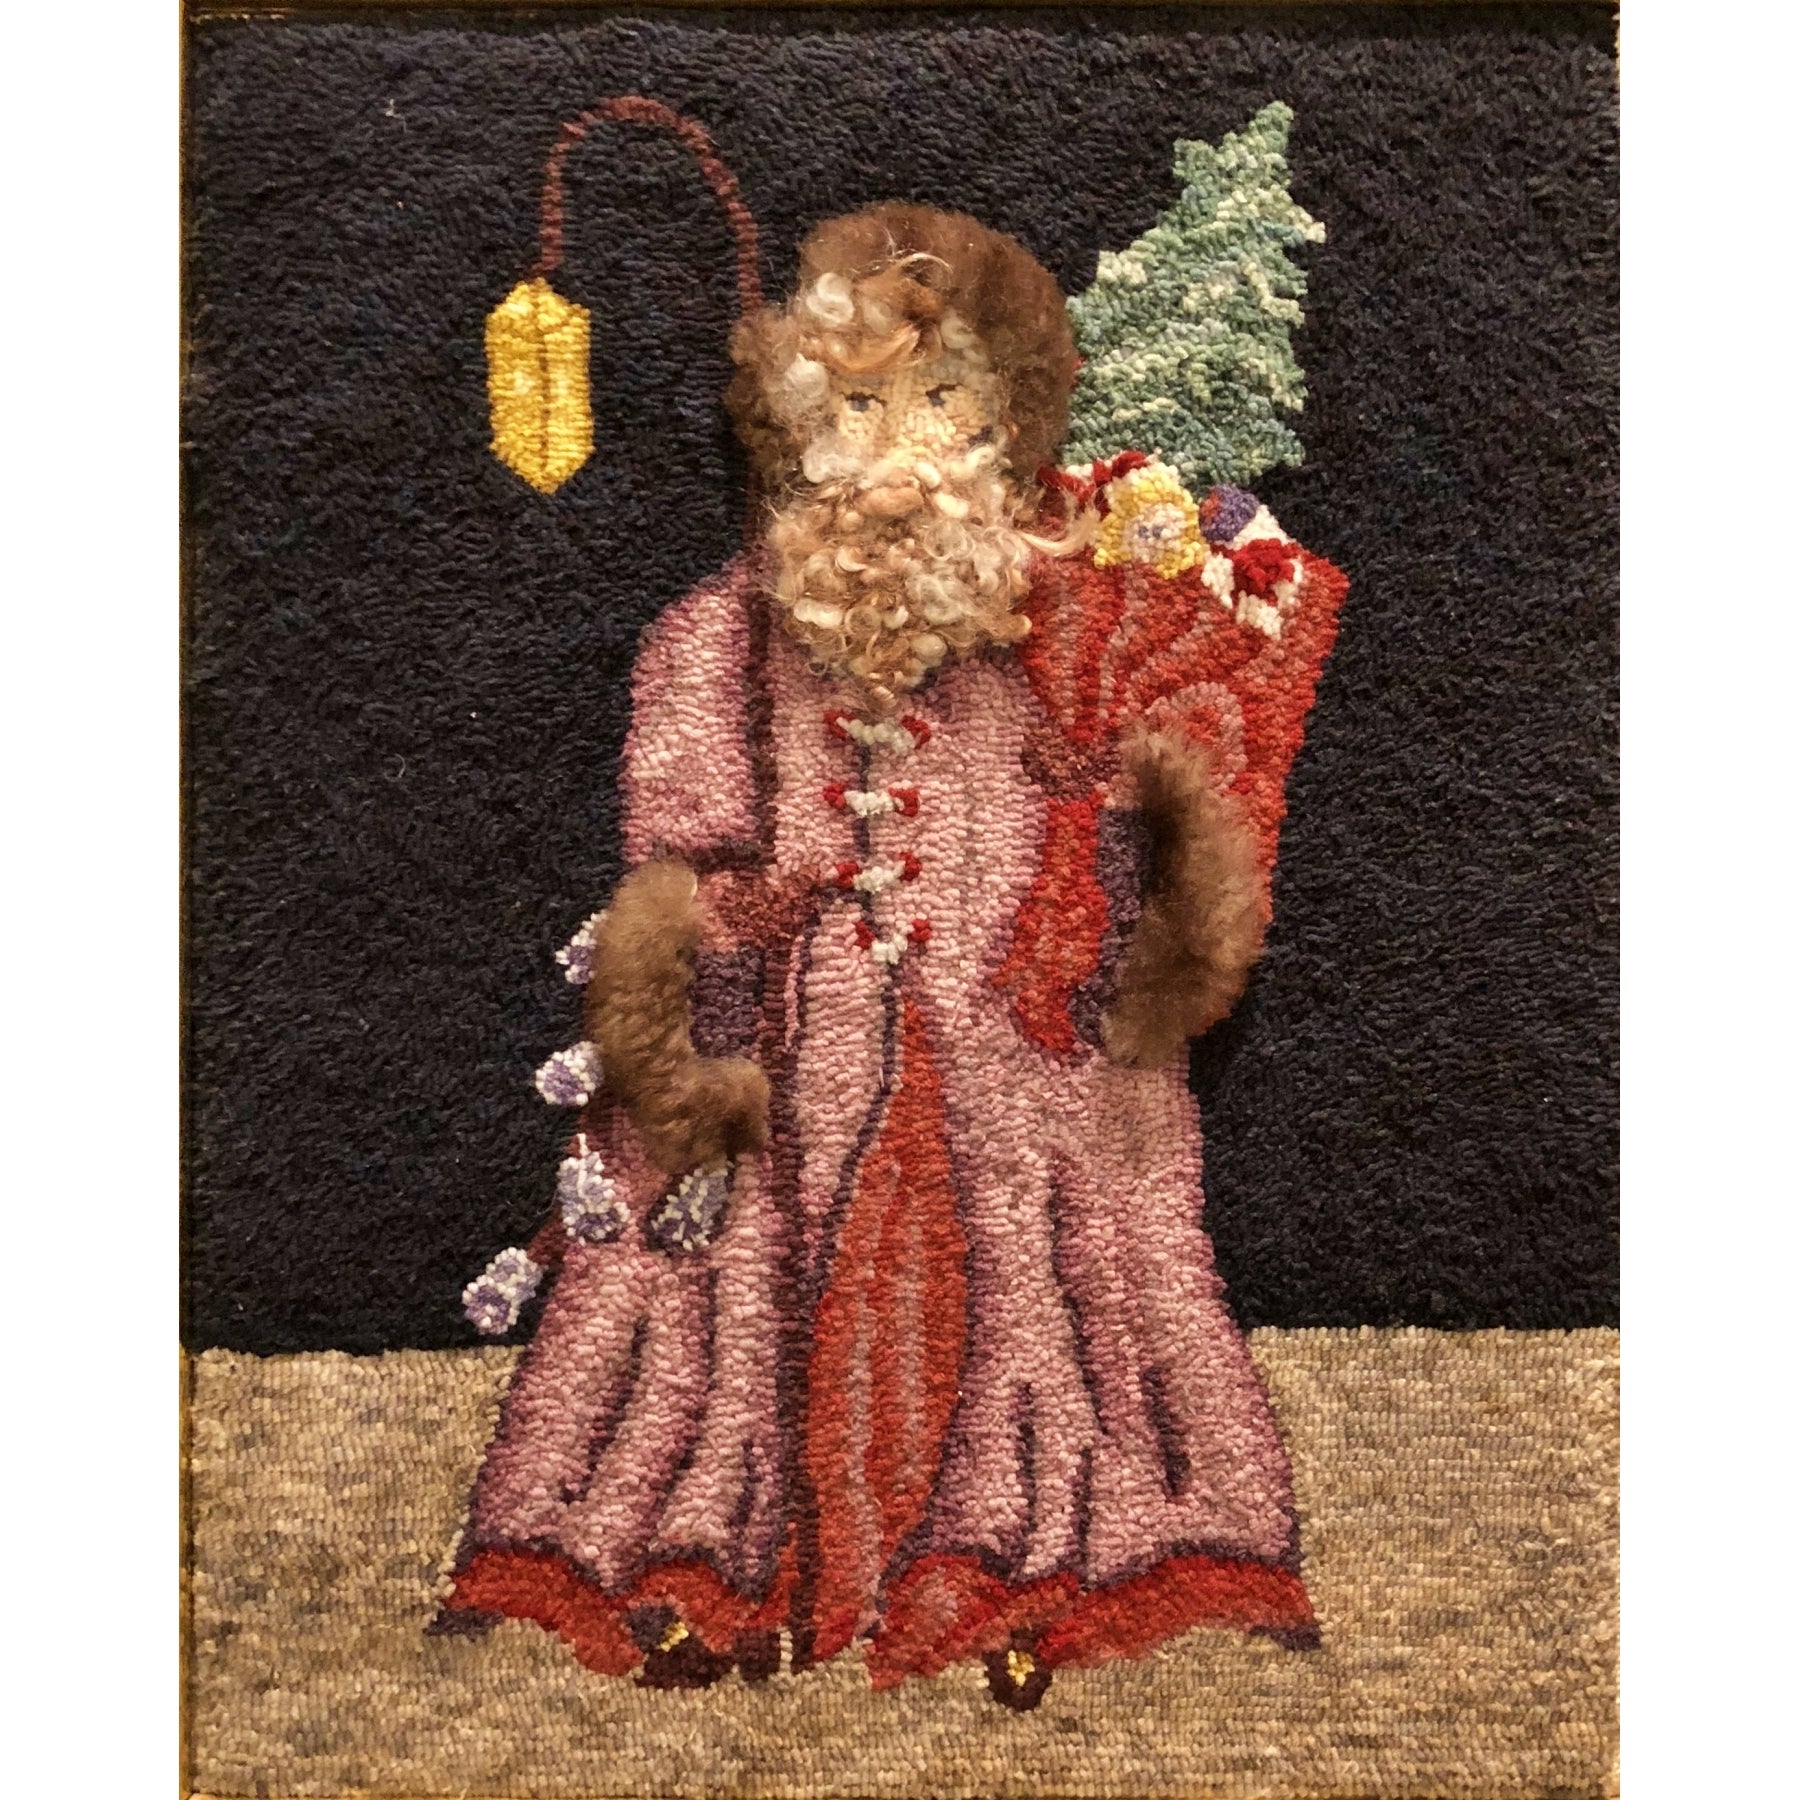 Father Christmas, rug hooked by Elyse Olson